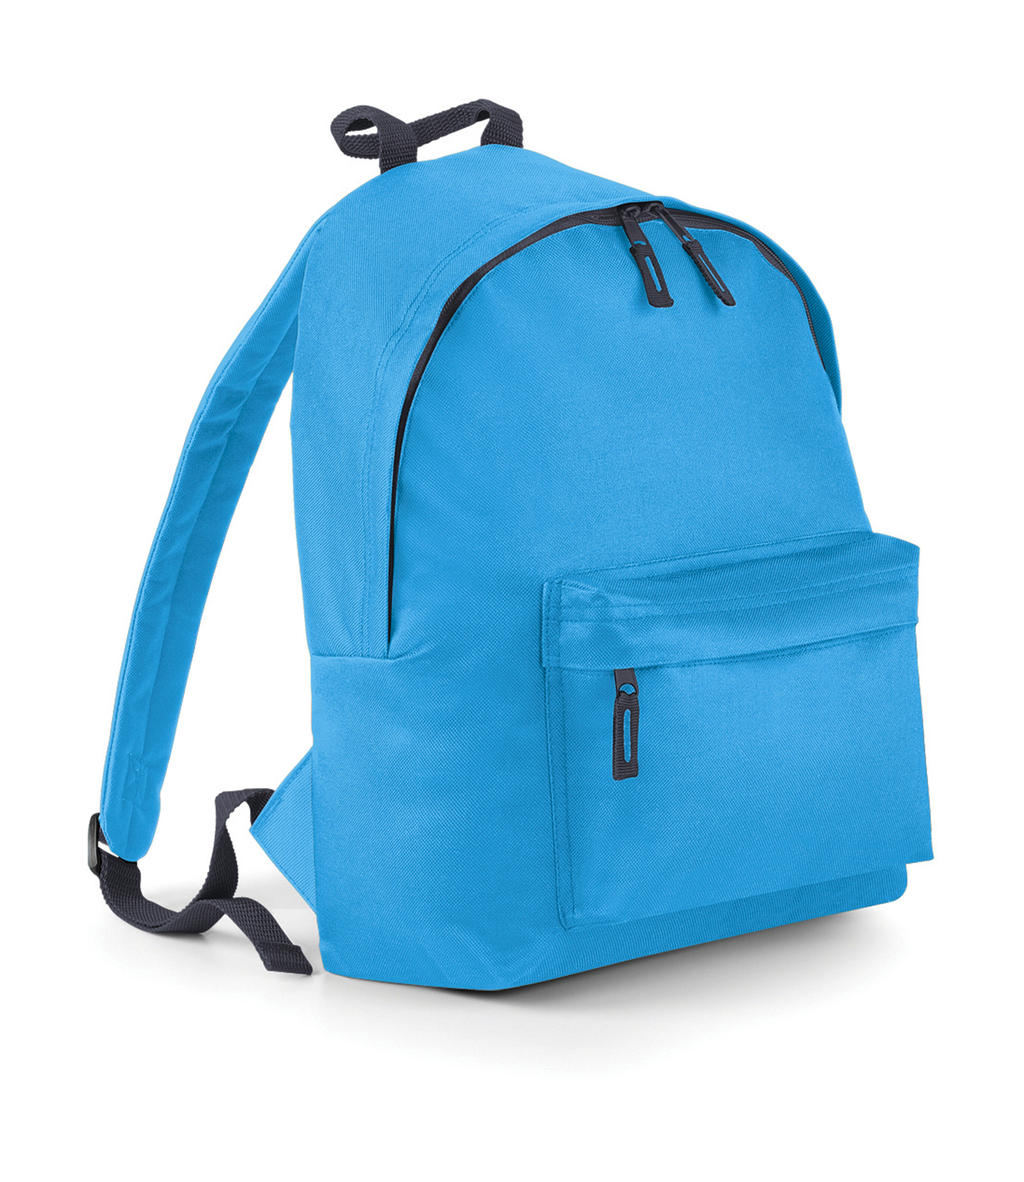  Junior Fashion Backpack in Farbe Surf Blue/Graphite Grey